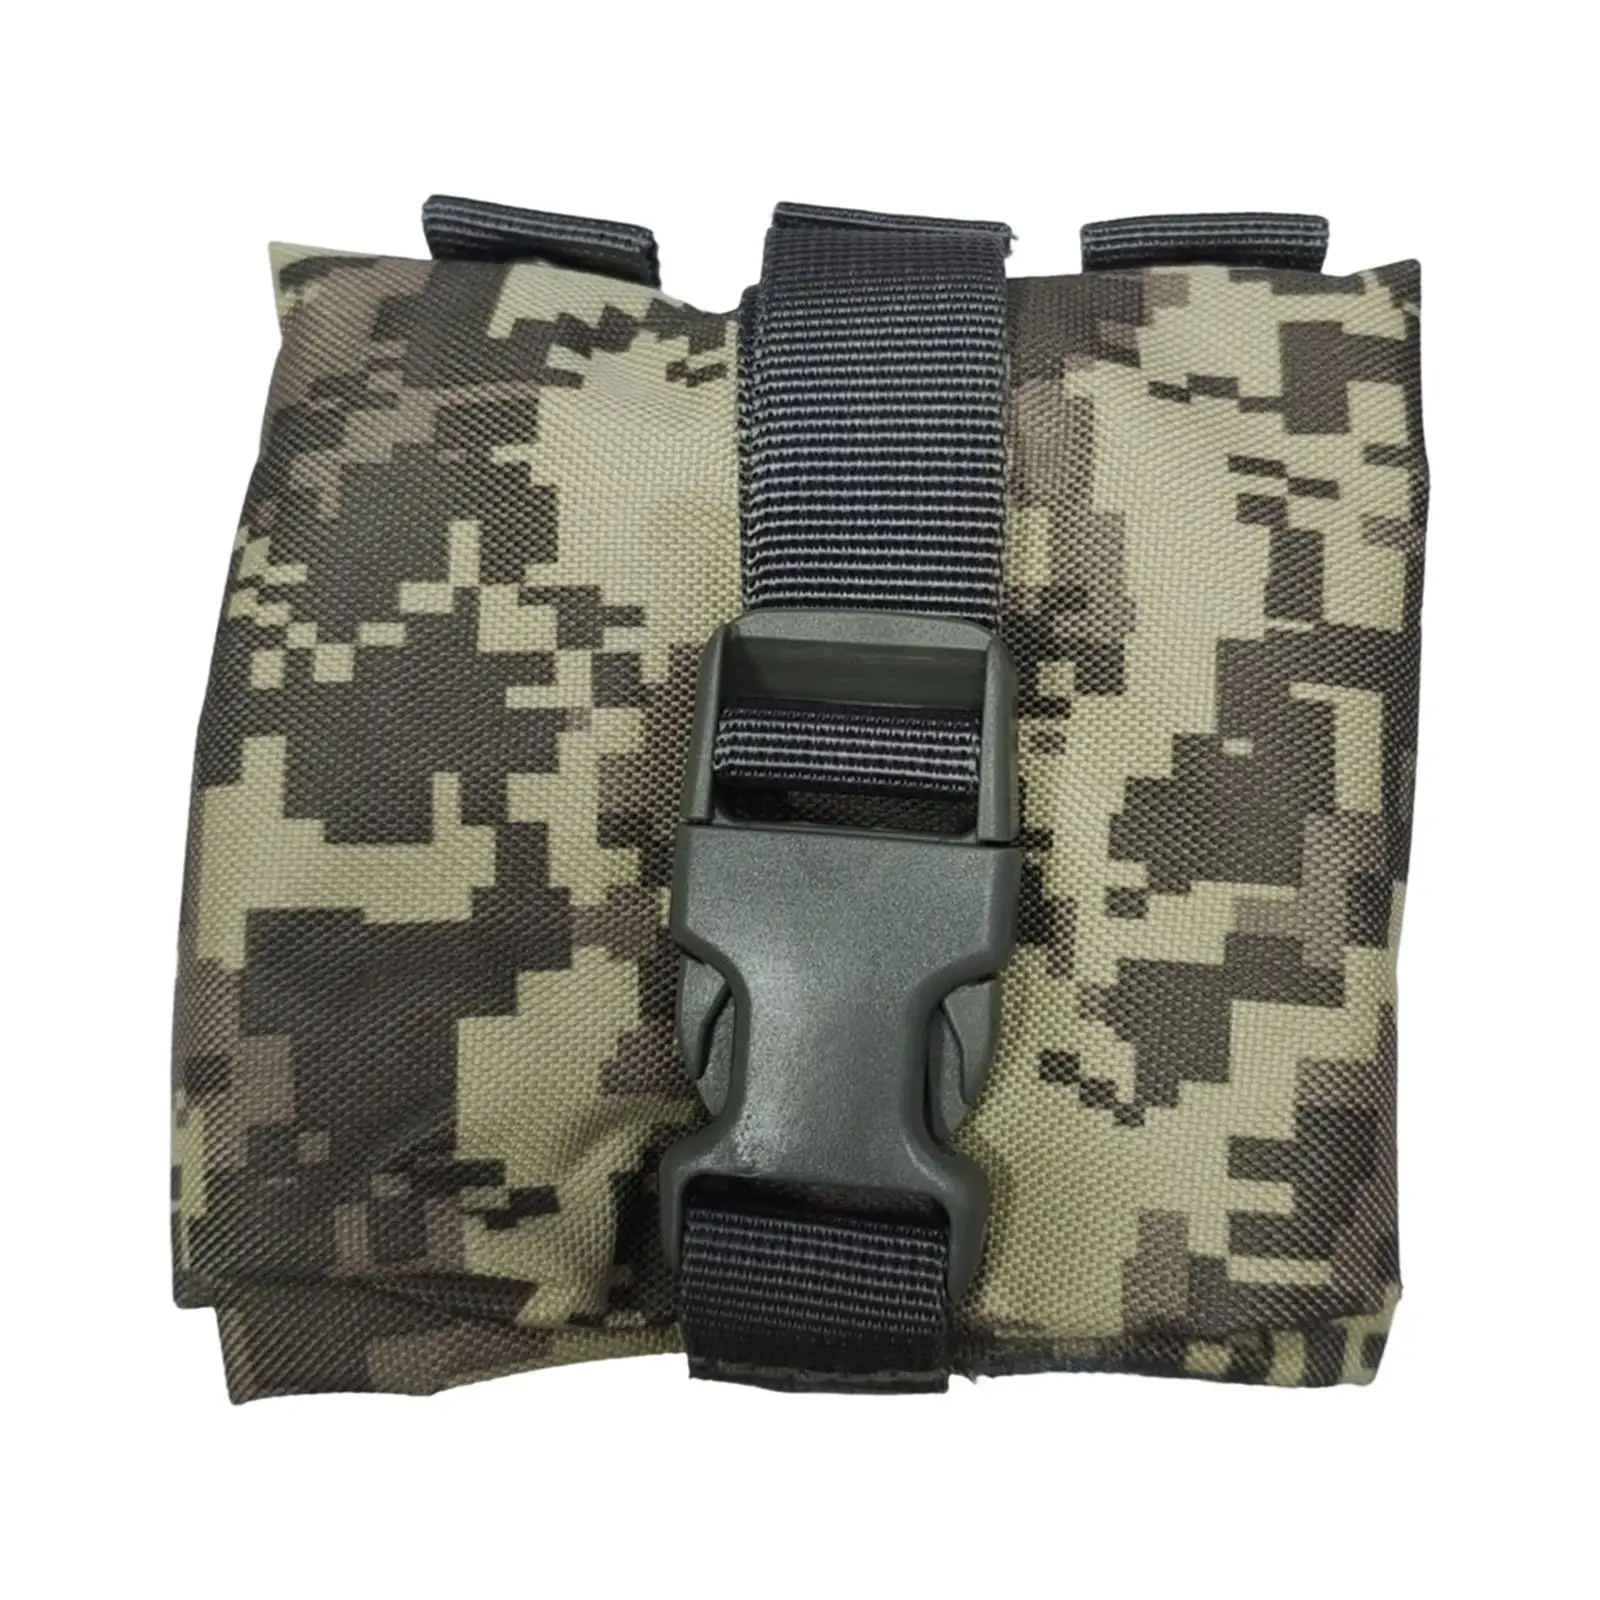 Multifunctional Outdoor Tactical Bag Adjustable Durable Easy to Carry Molle Pouch for Running Hunting Outside Climbing Cycling